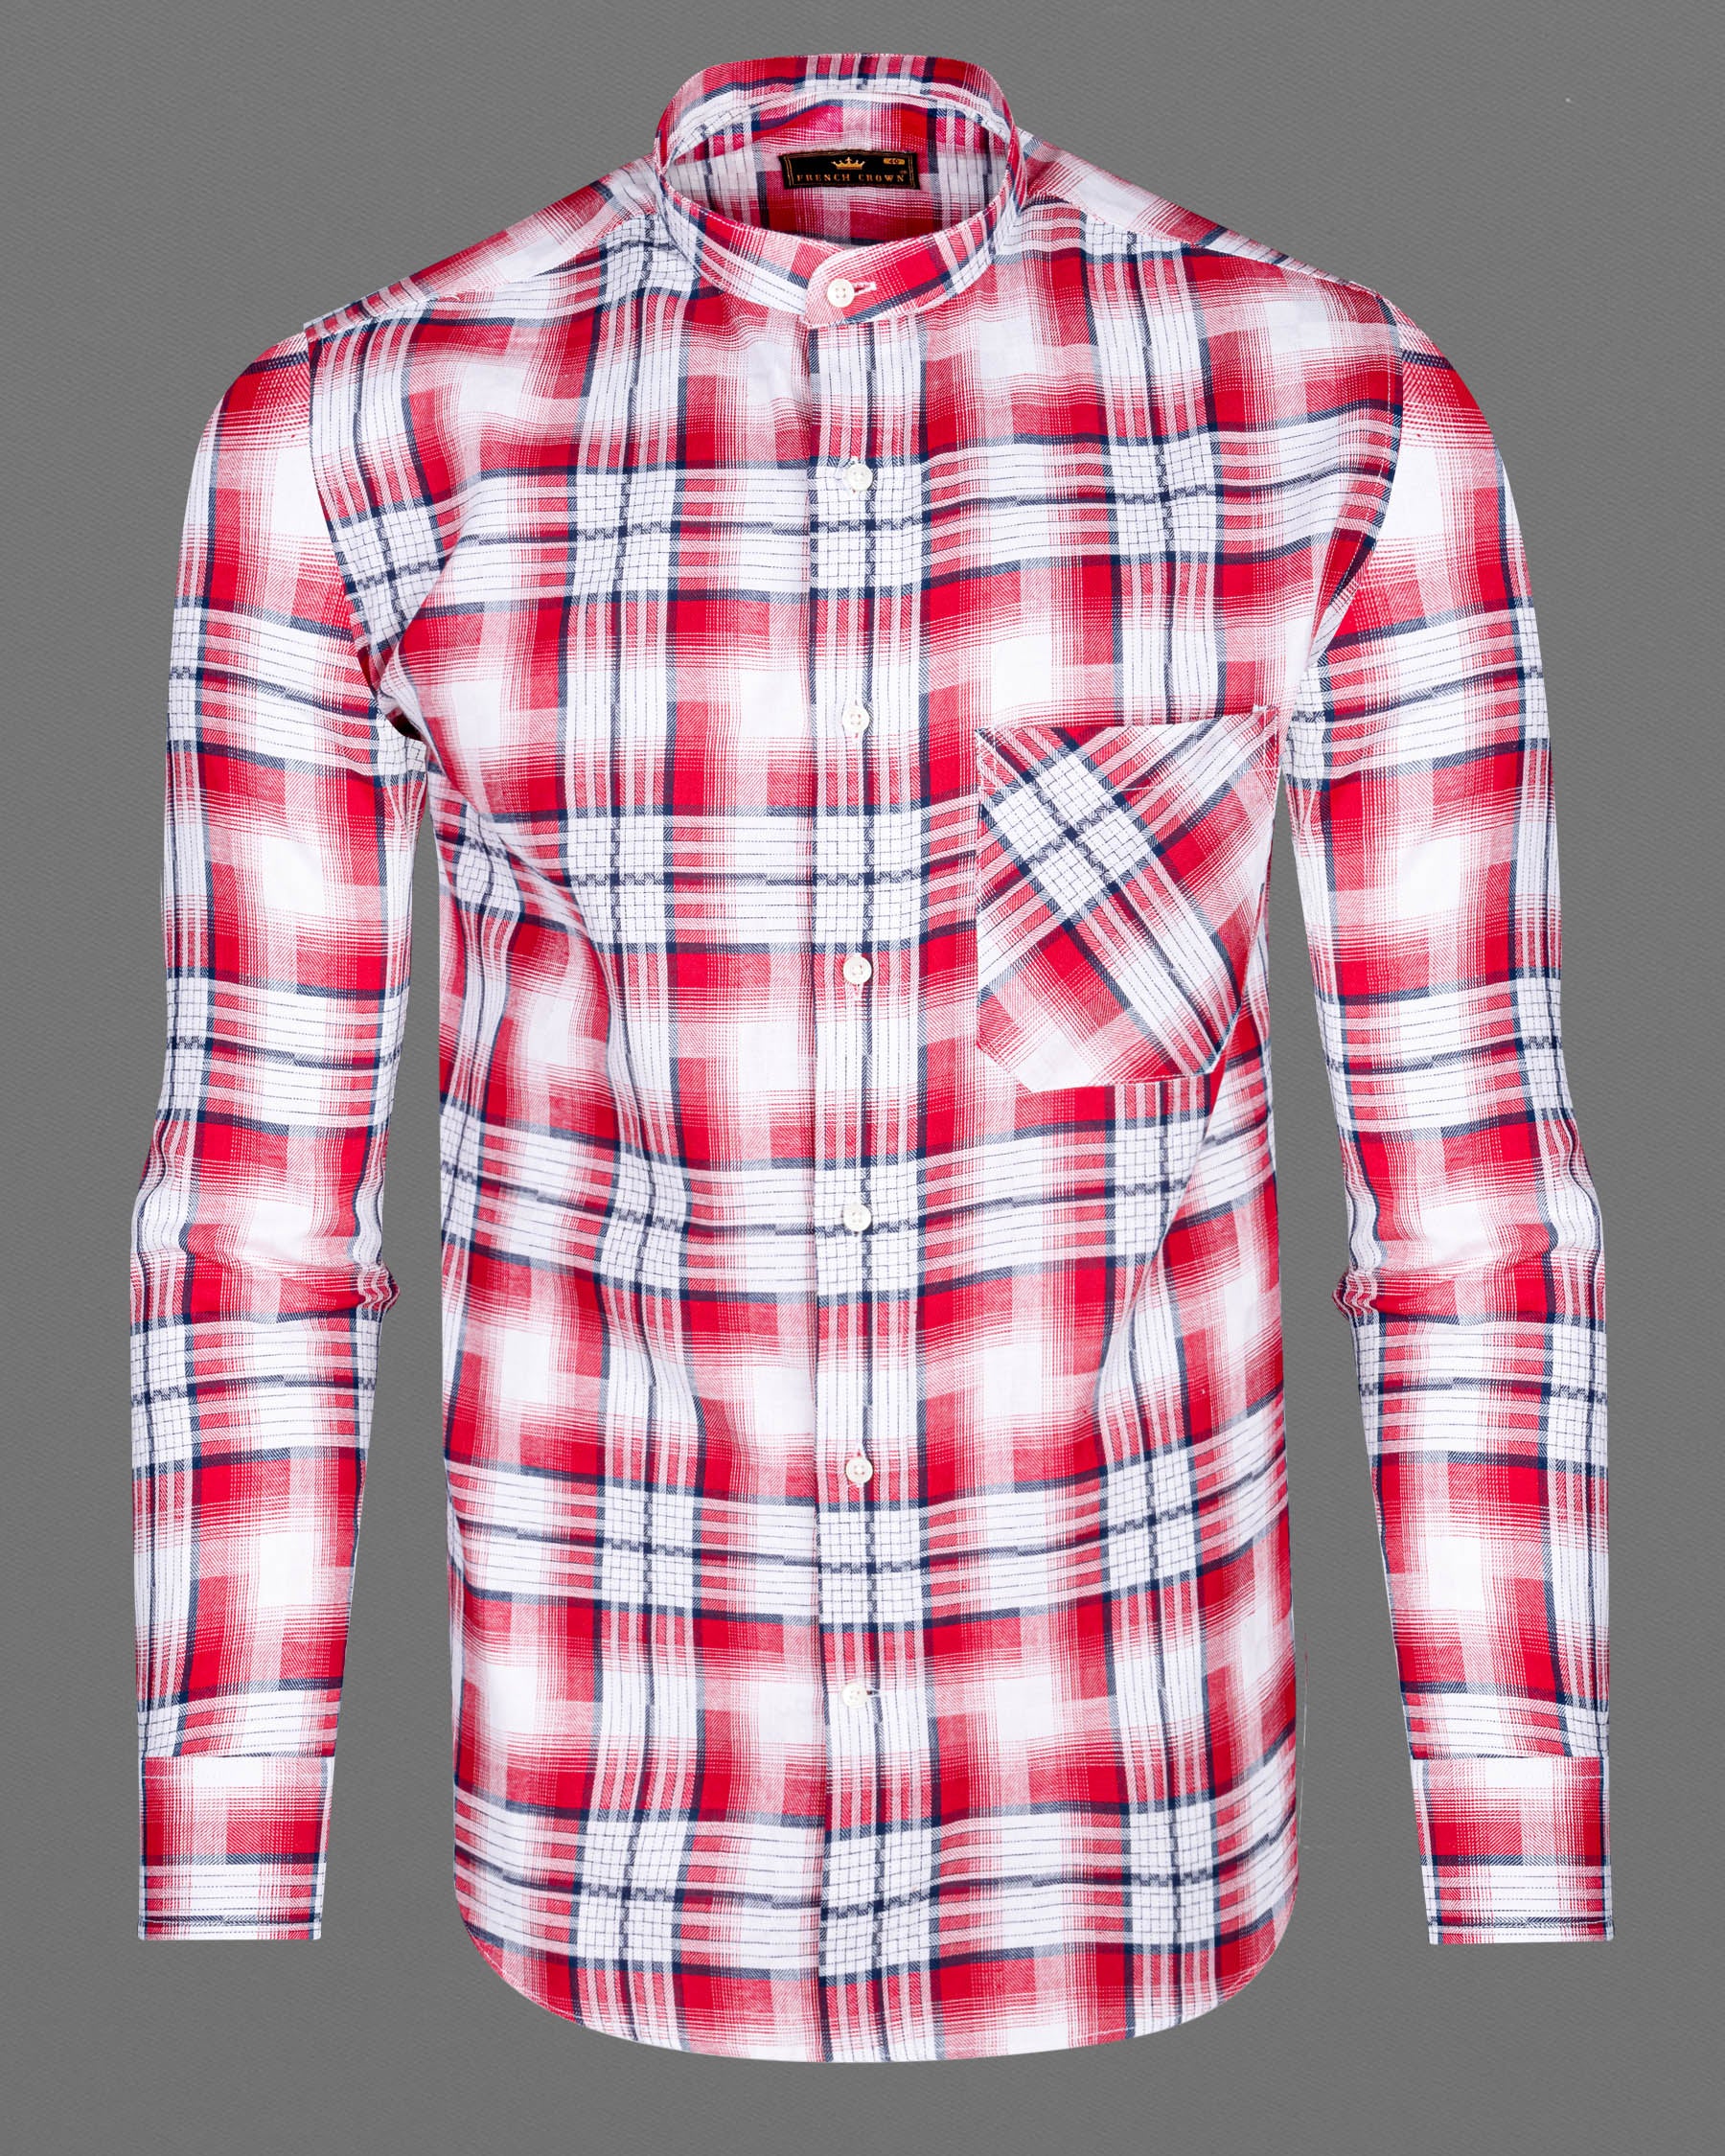 Bright White and Scarlet Red Plaid Twill Premium Cotton Shirt 6971-M-38,6971-M-38,6971-M-39,6971-M-39,6971-M-40,6971-M-40,6971-M-42,6971-M-42,6971-M-44,6971-M-44,6971-M-46,6971-M-46,6971-M-48,6971-M-48,6971-M-50,6971-M-50,6971-M-52,6971-M-52